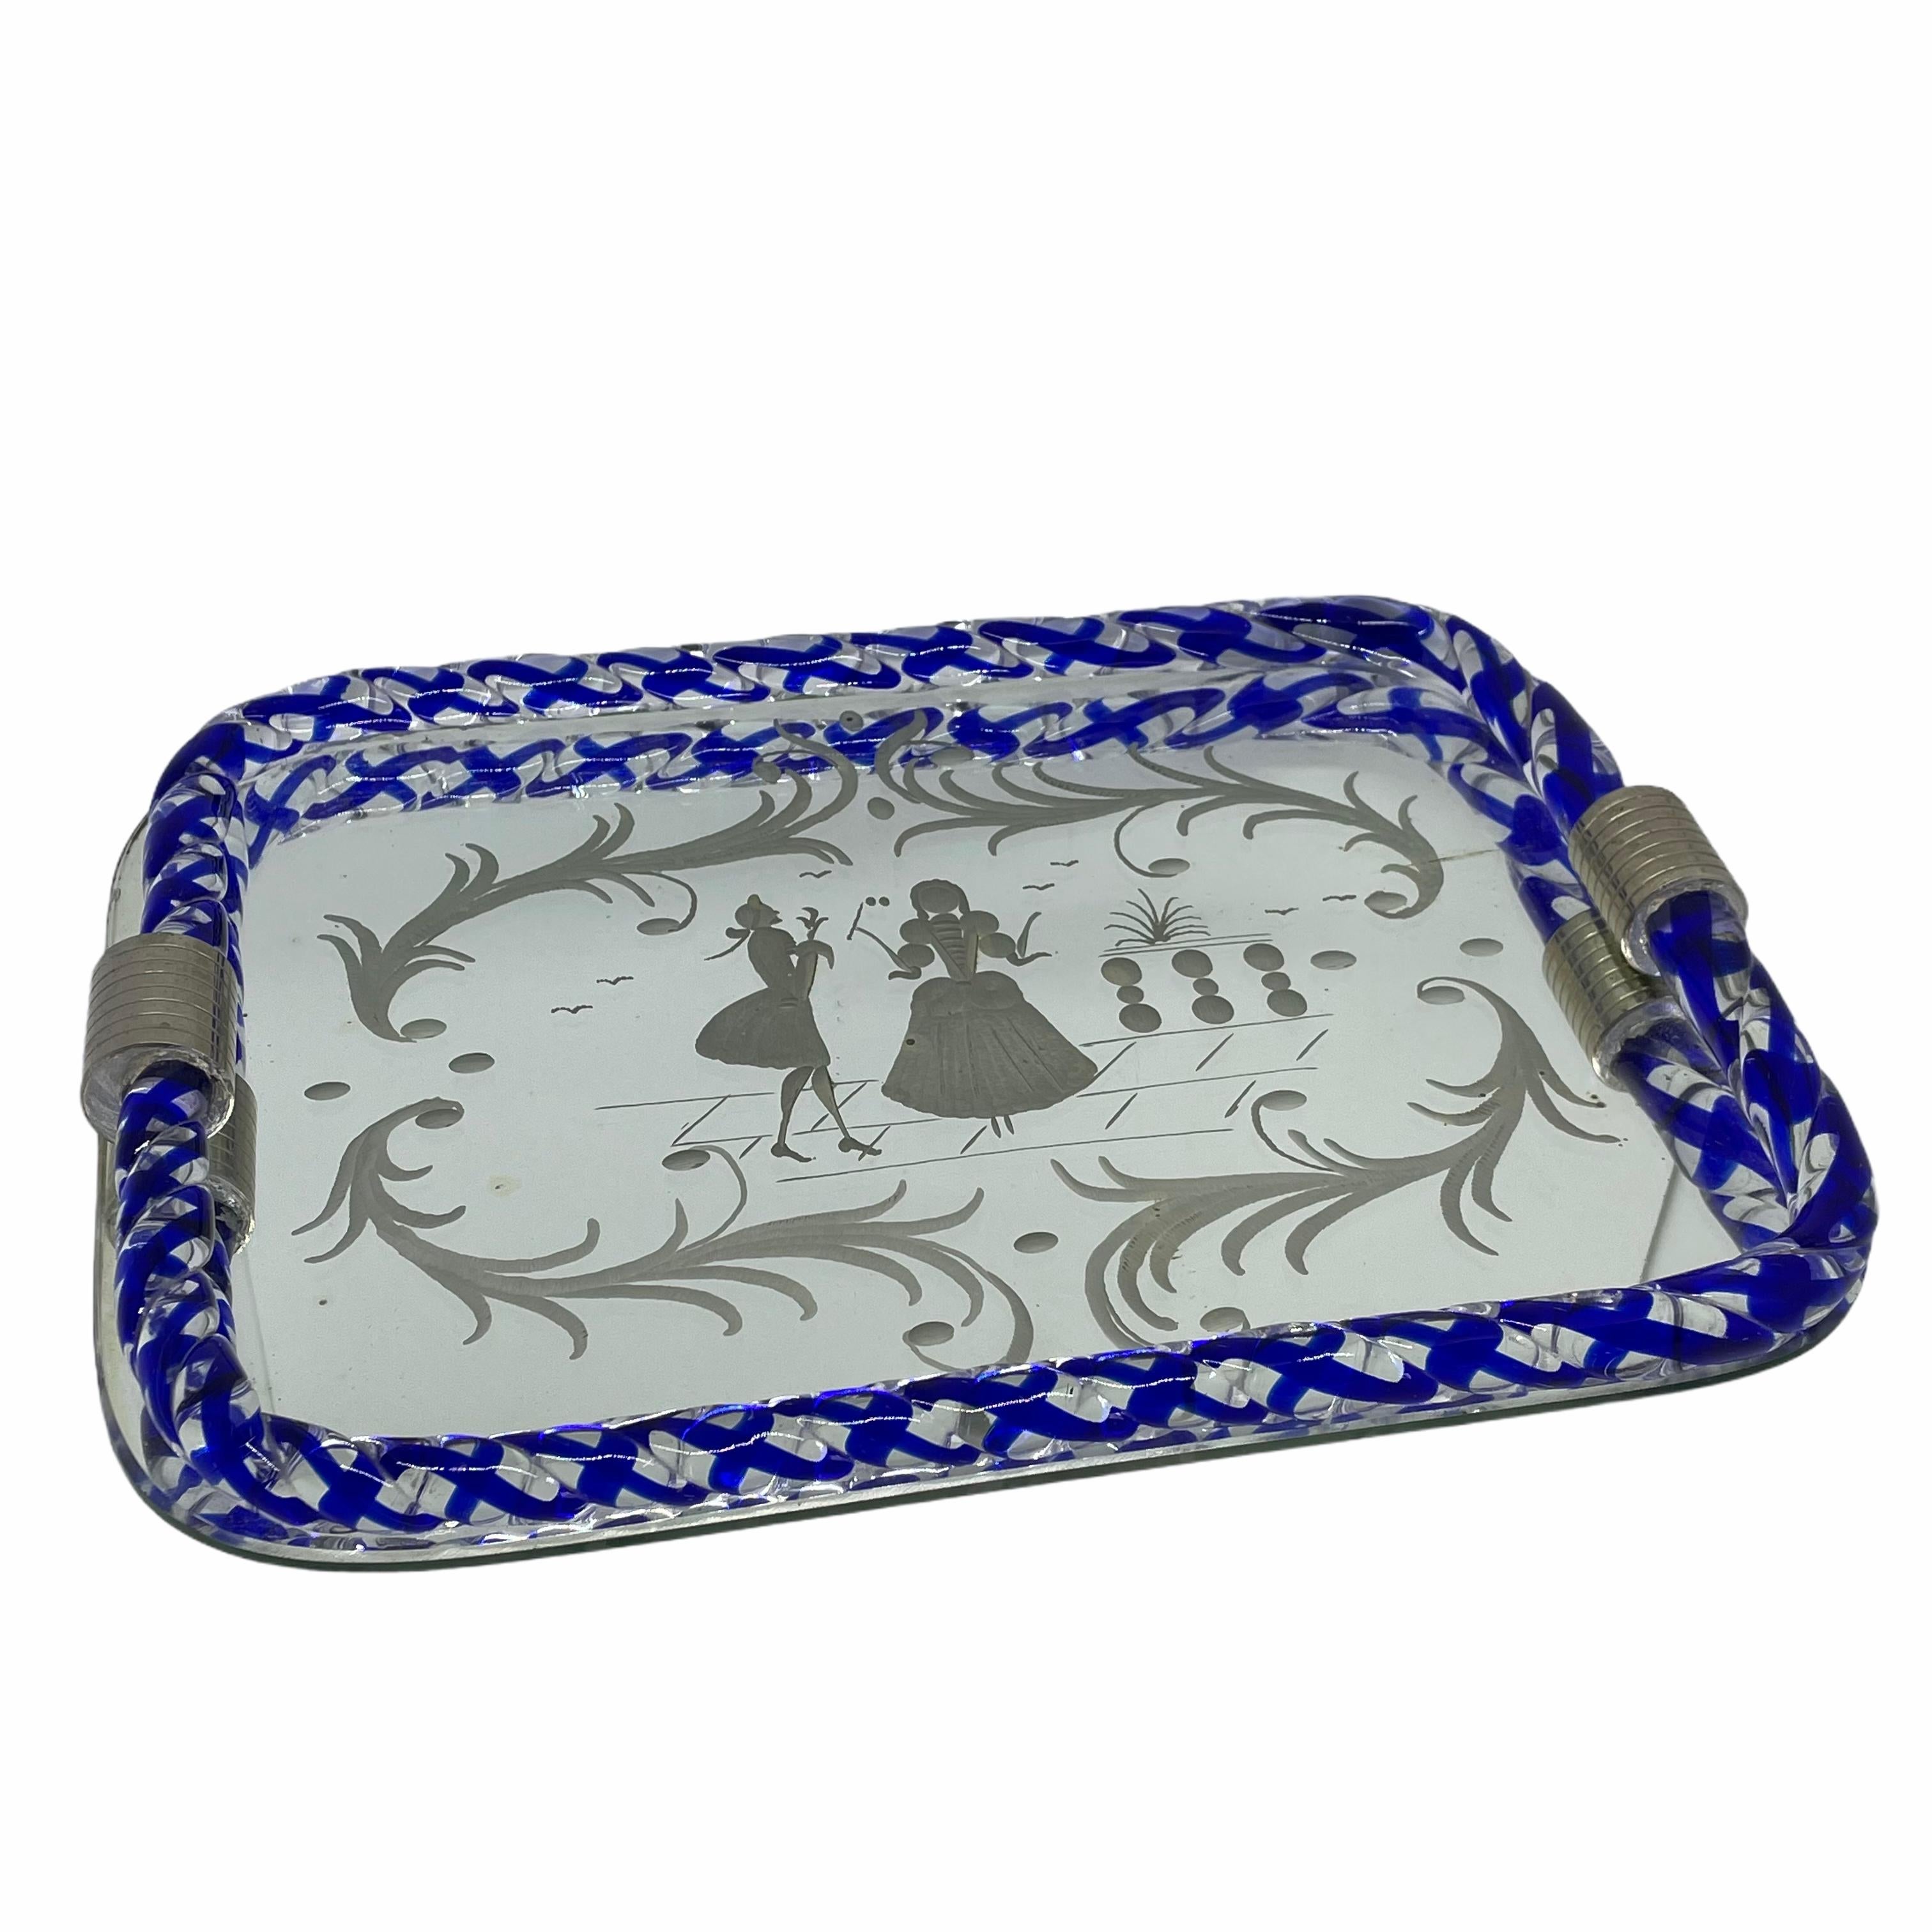 Created by Ercole Barovier, this piece is a beautiful Italian serving or vanity table tray edged in Murano glass rope that is embedded with blue. Done in the style of Luigi Brusotti and Gio Ponti, the mirror is etched with Venetian romantic figures